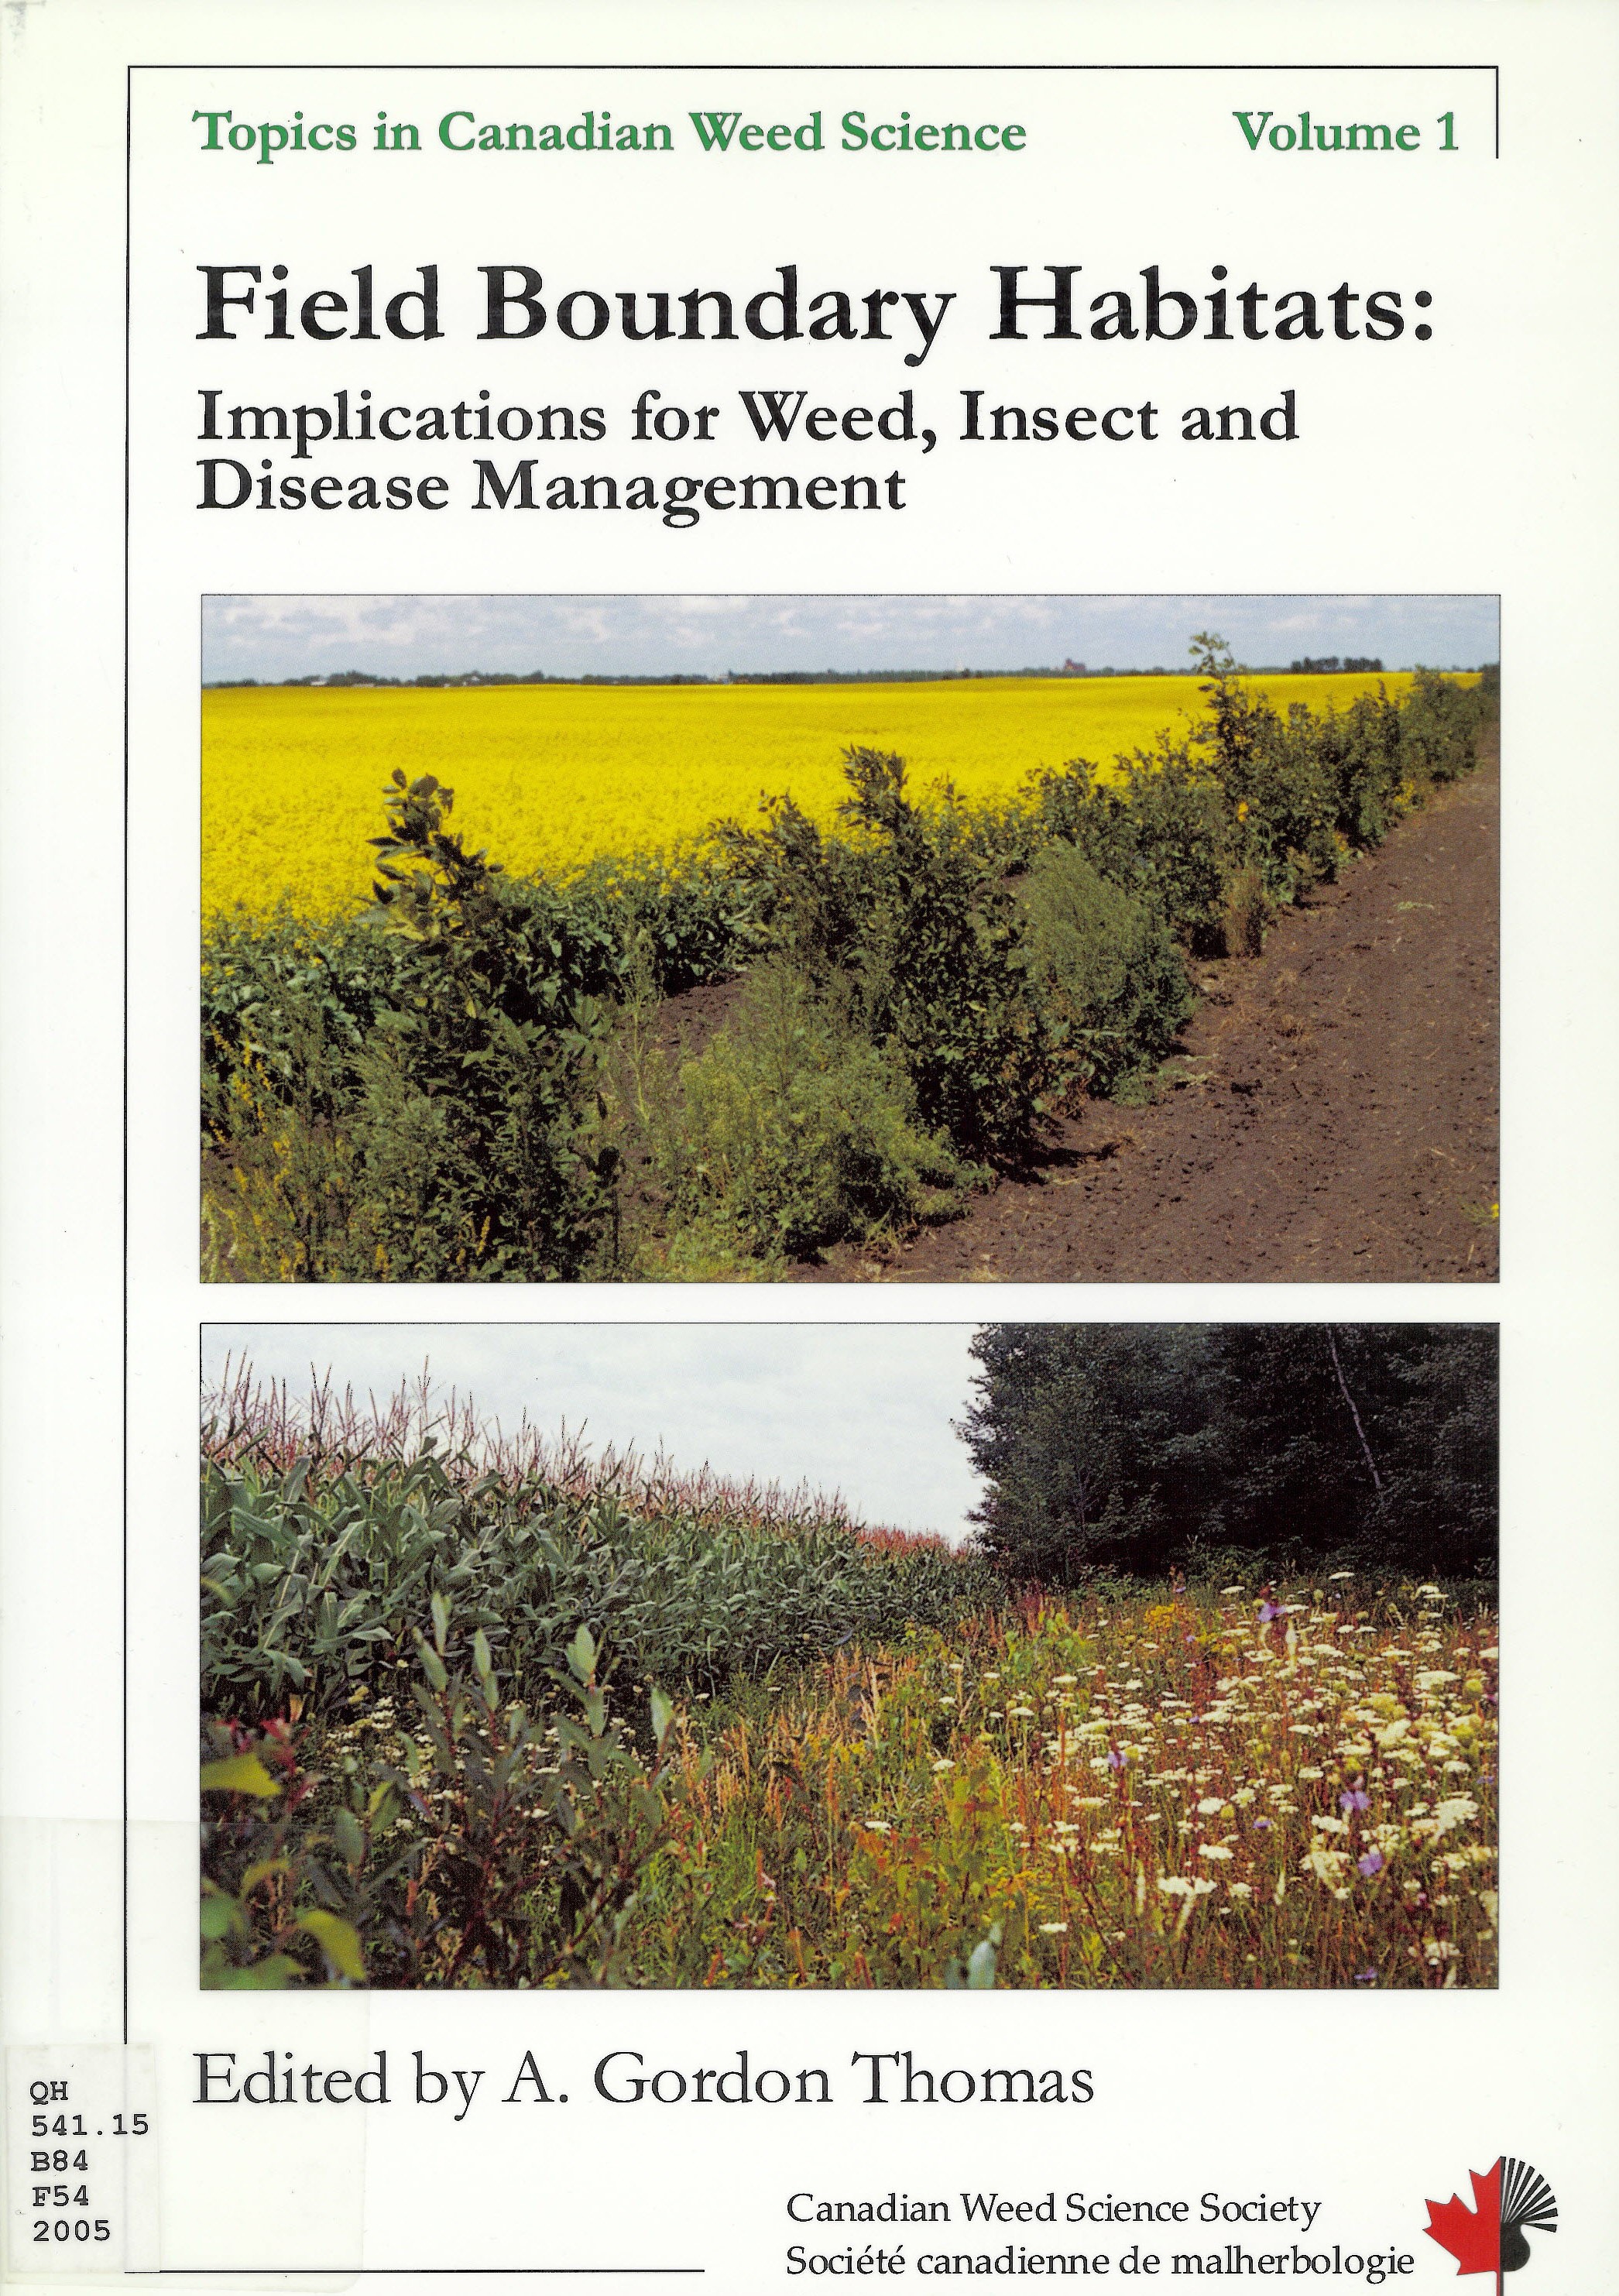 Field boundary habitats : implications for weed, insect and disease management